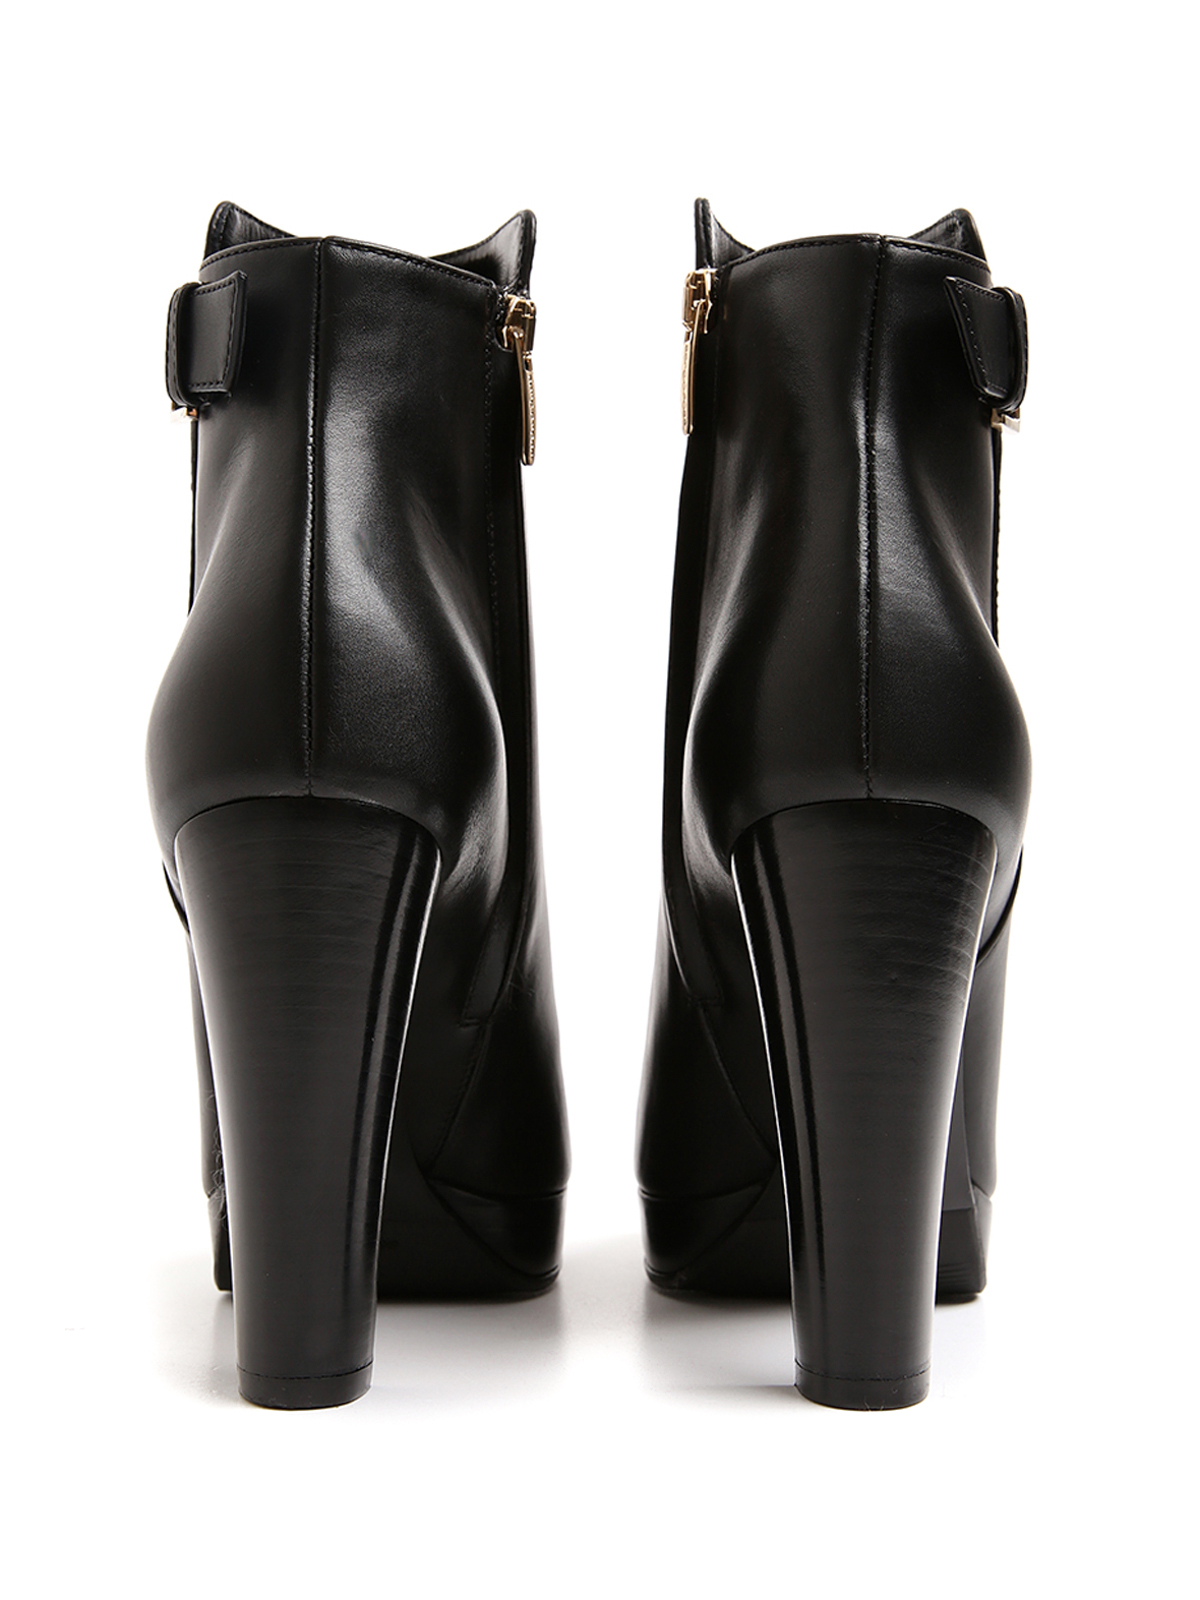 Sergio Rossi - Courtney leather boots 